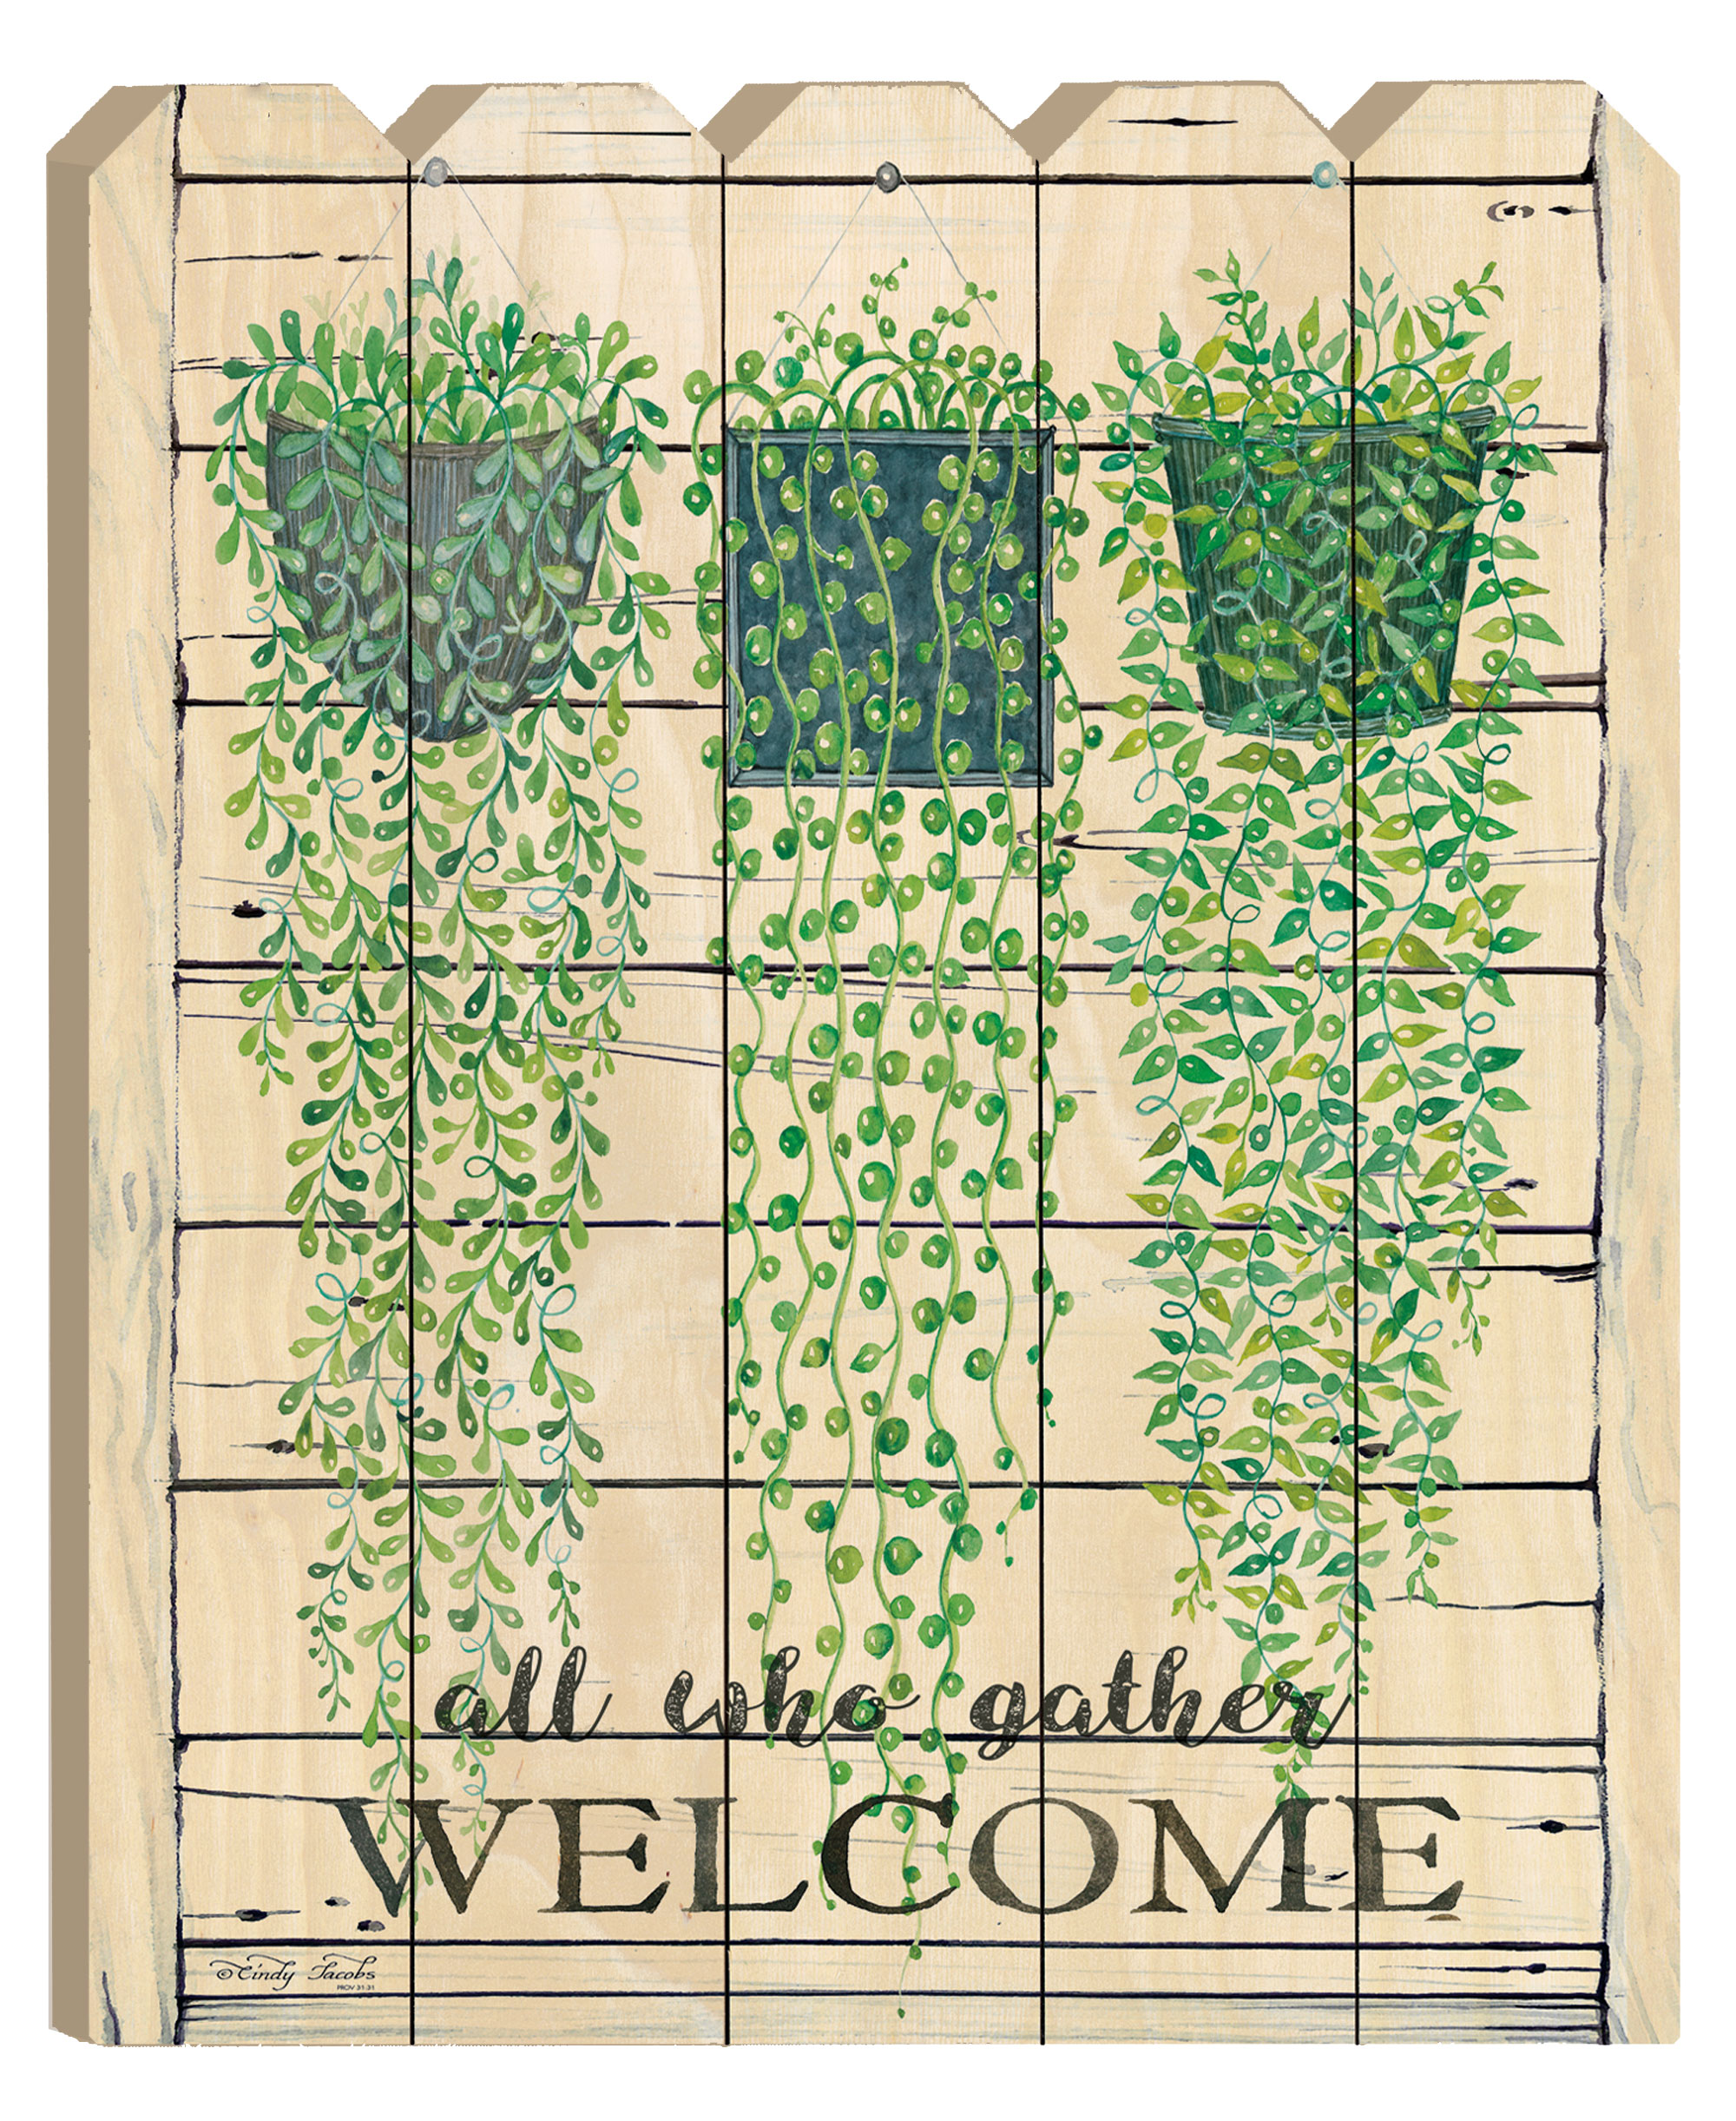 "Ivy Welcome" By Artisan Cindy Jacobs, Printed on Wooden Picket Fence Wall Art